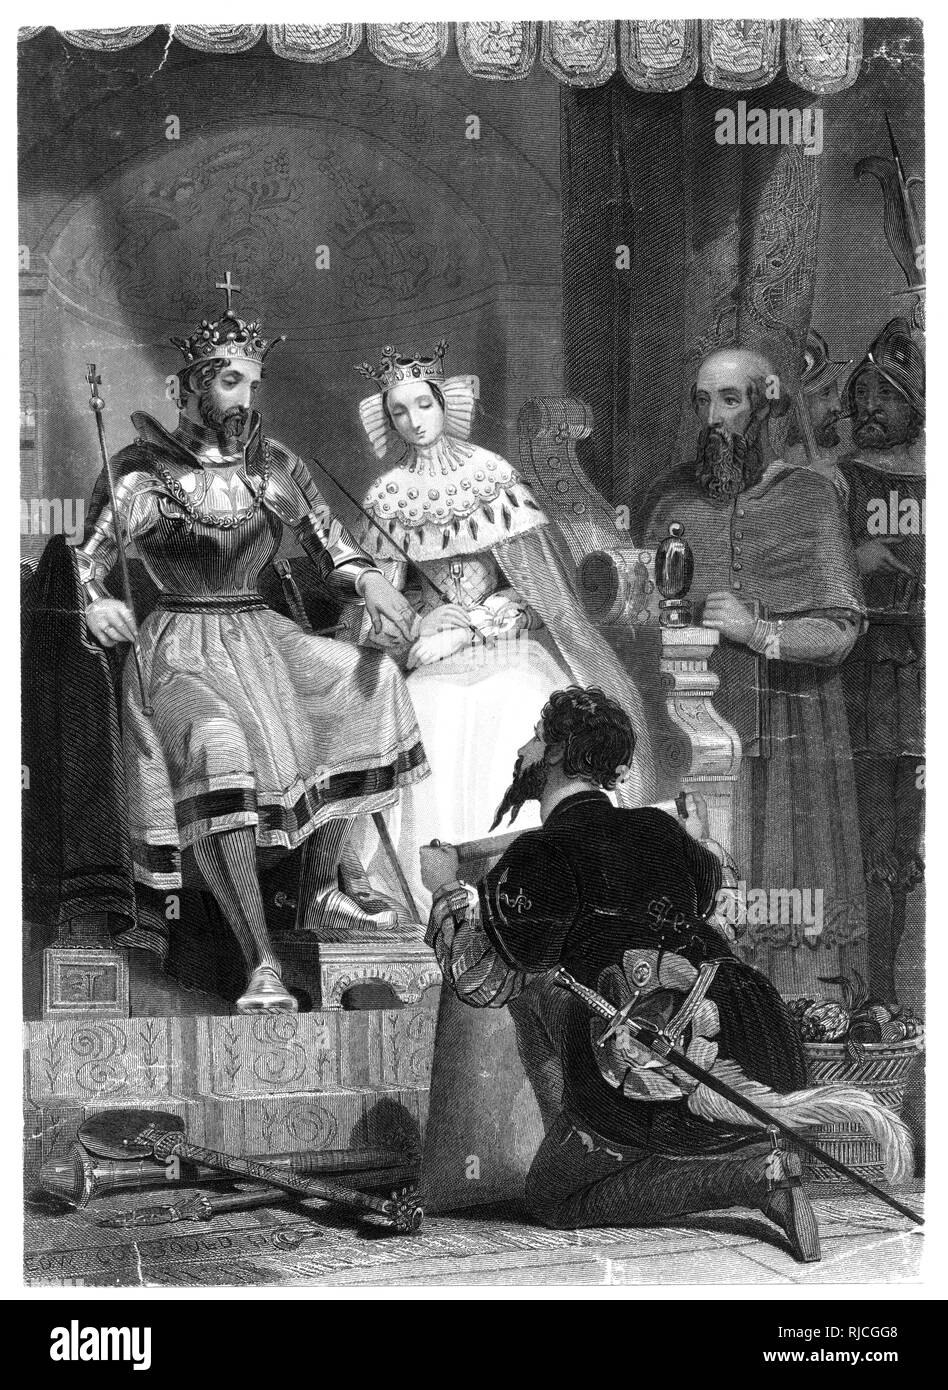 Christopher Columbus explains his plans to Ferdinand and Isabella in the royal court. Columbus kneels holding a scroll, as Ferdinand and Isabella listen from their thrones. Stock Photo